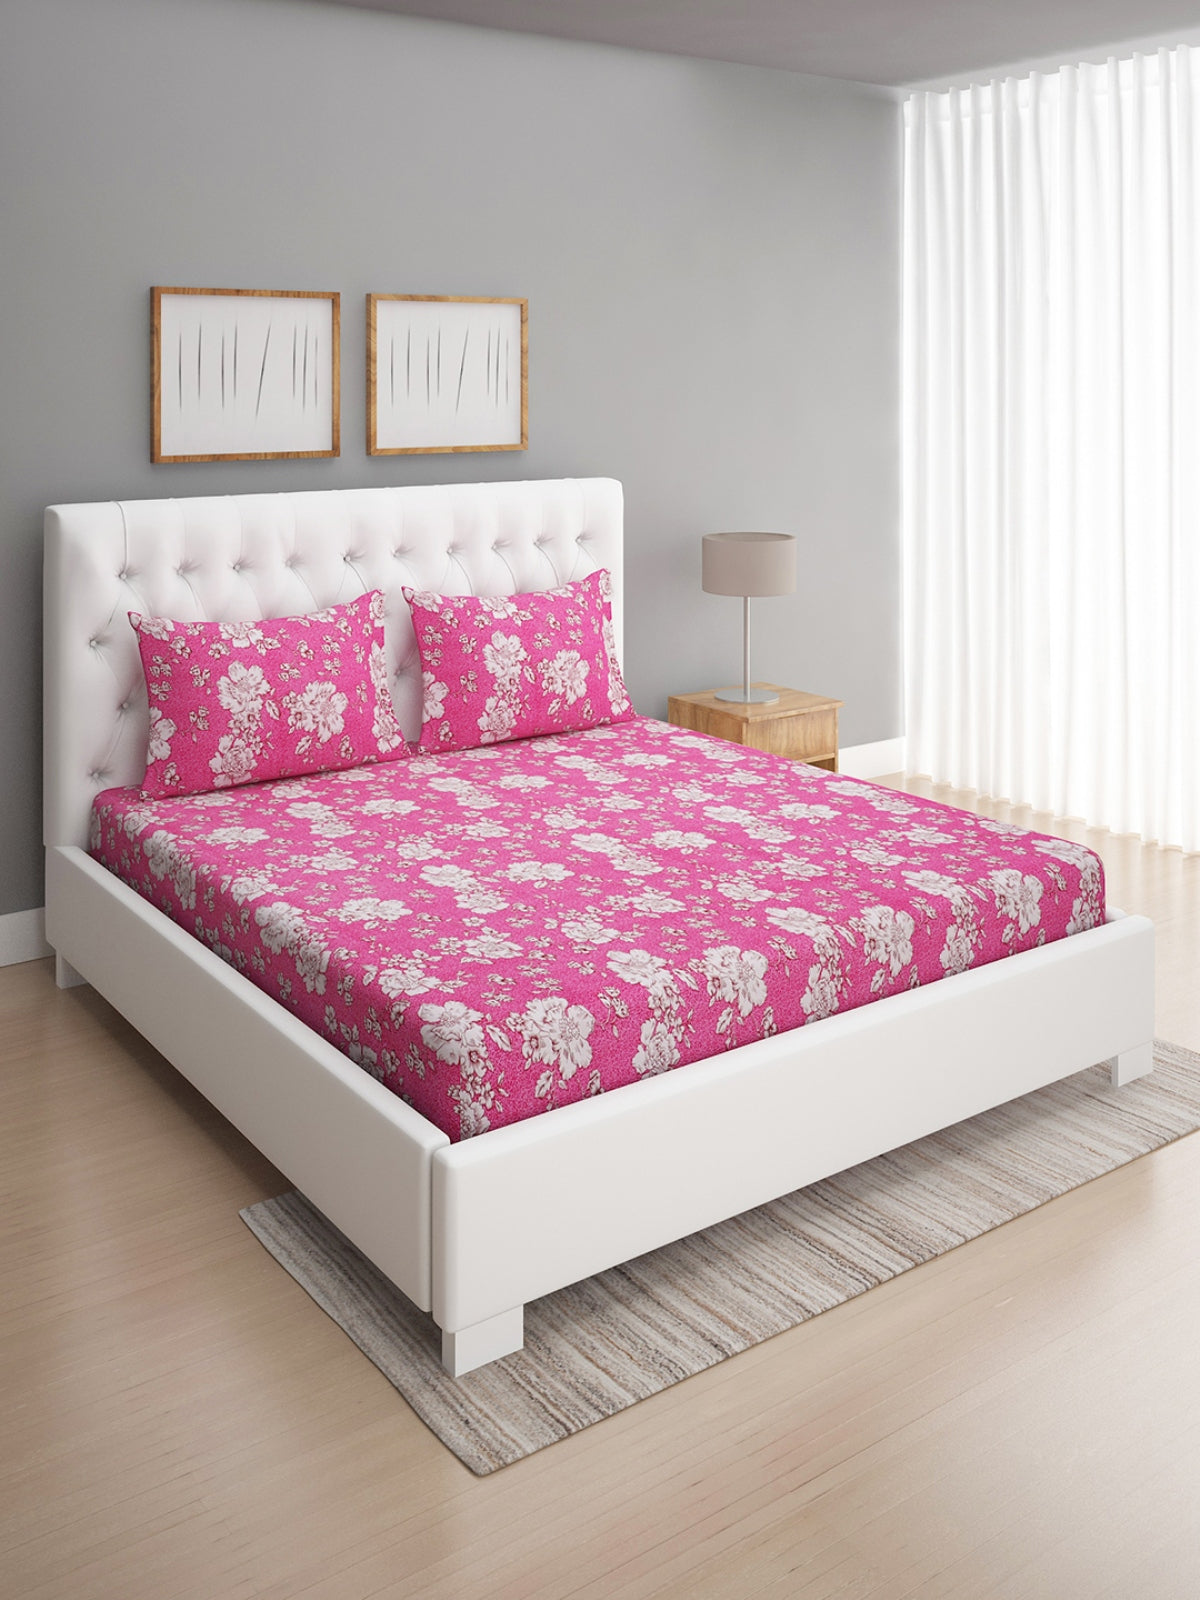 144 TC Pink Double Bedsheet with 2 Pillow Covers